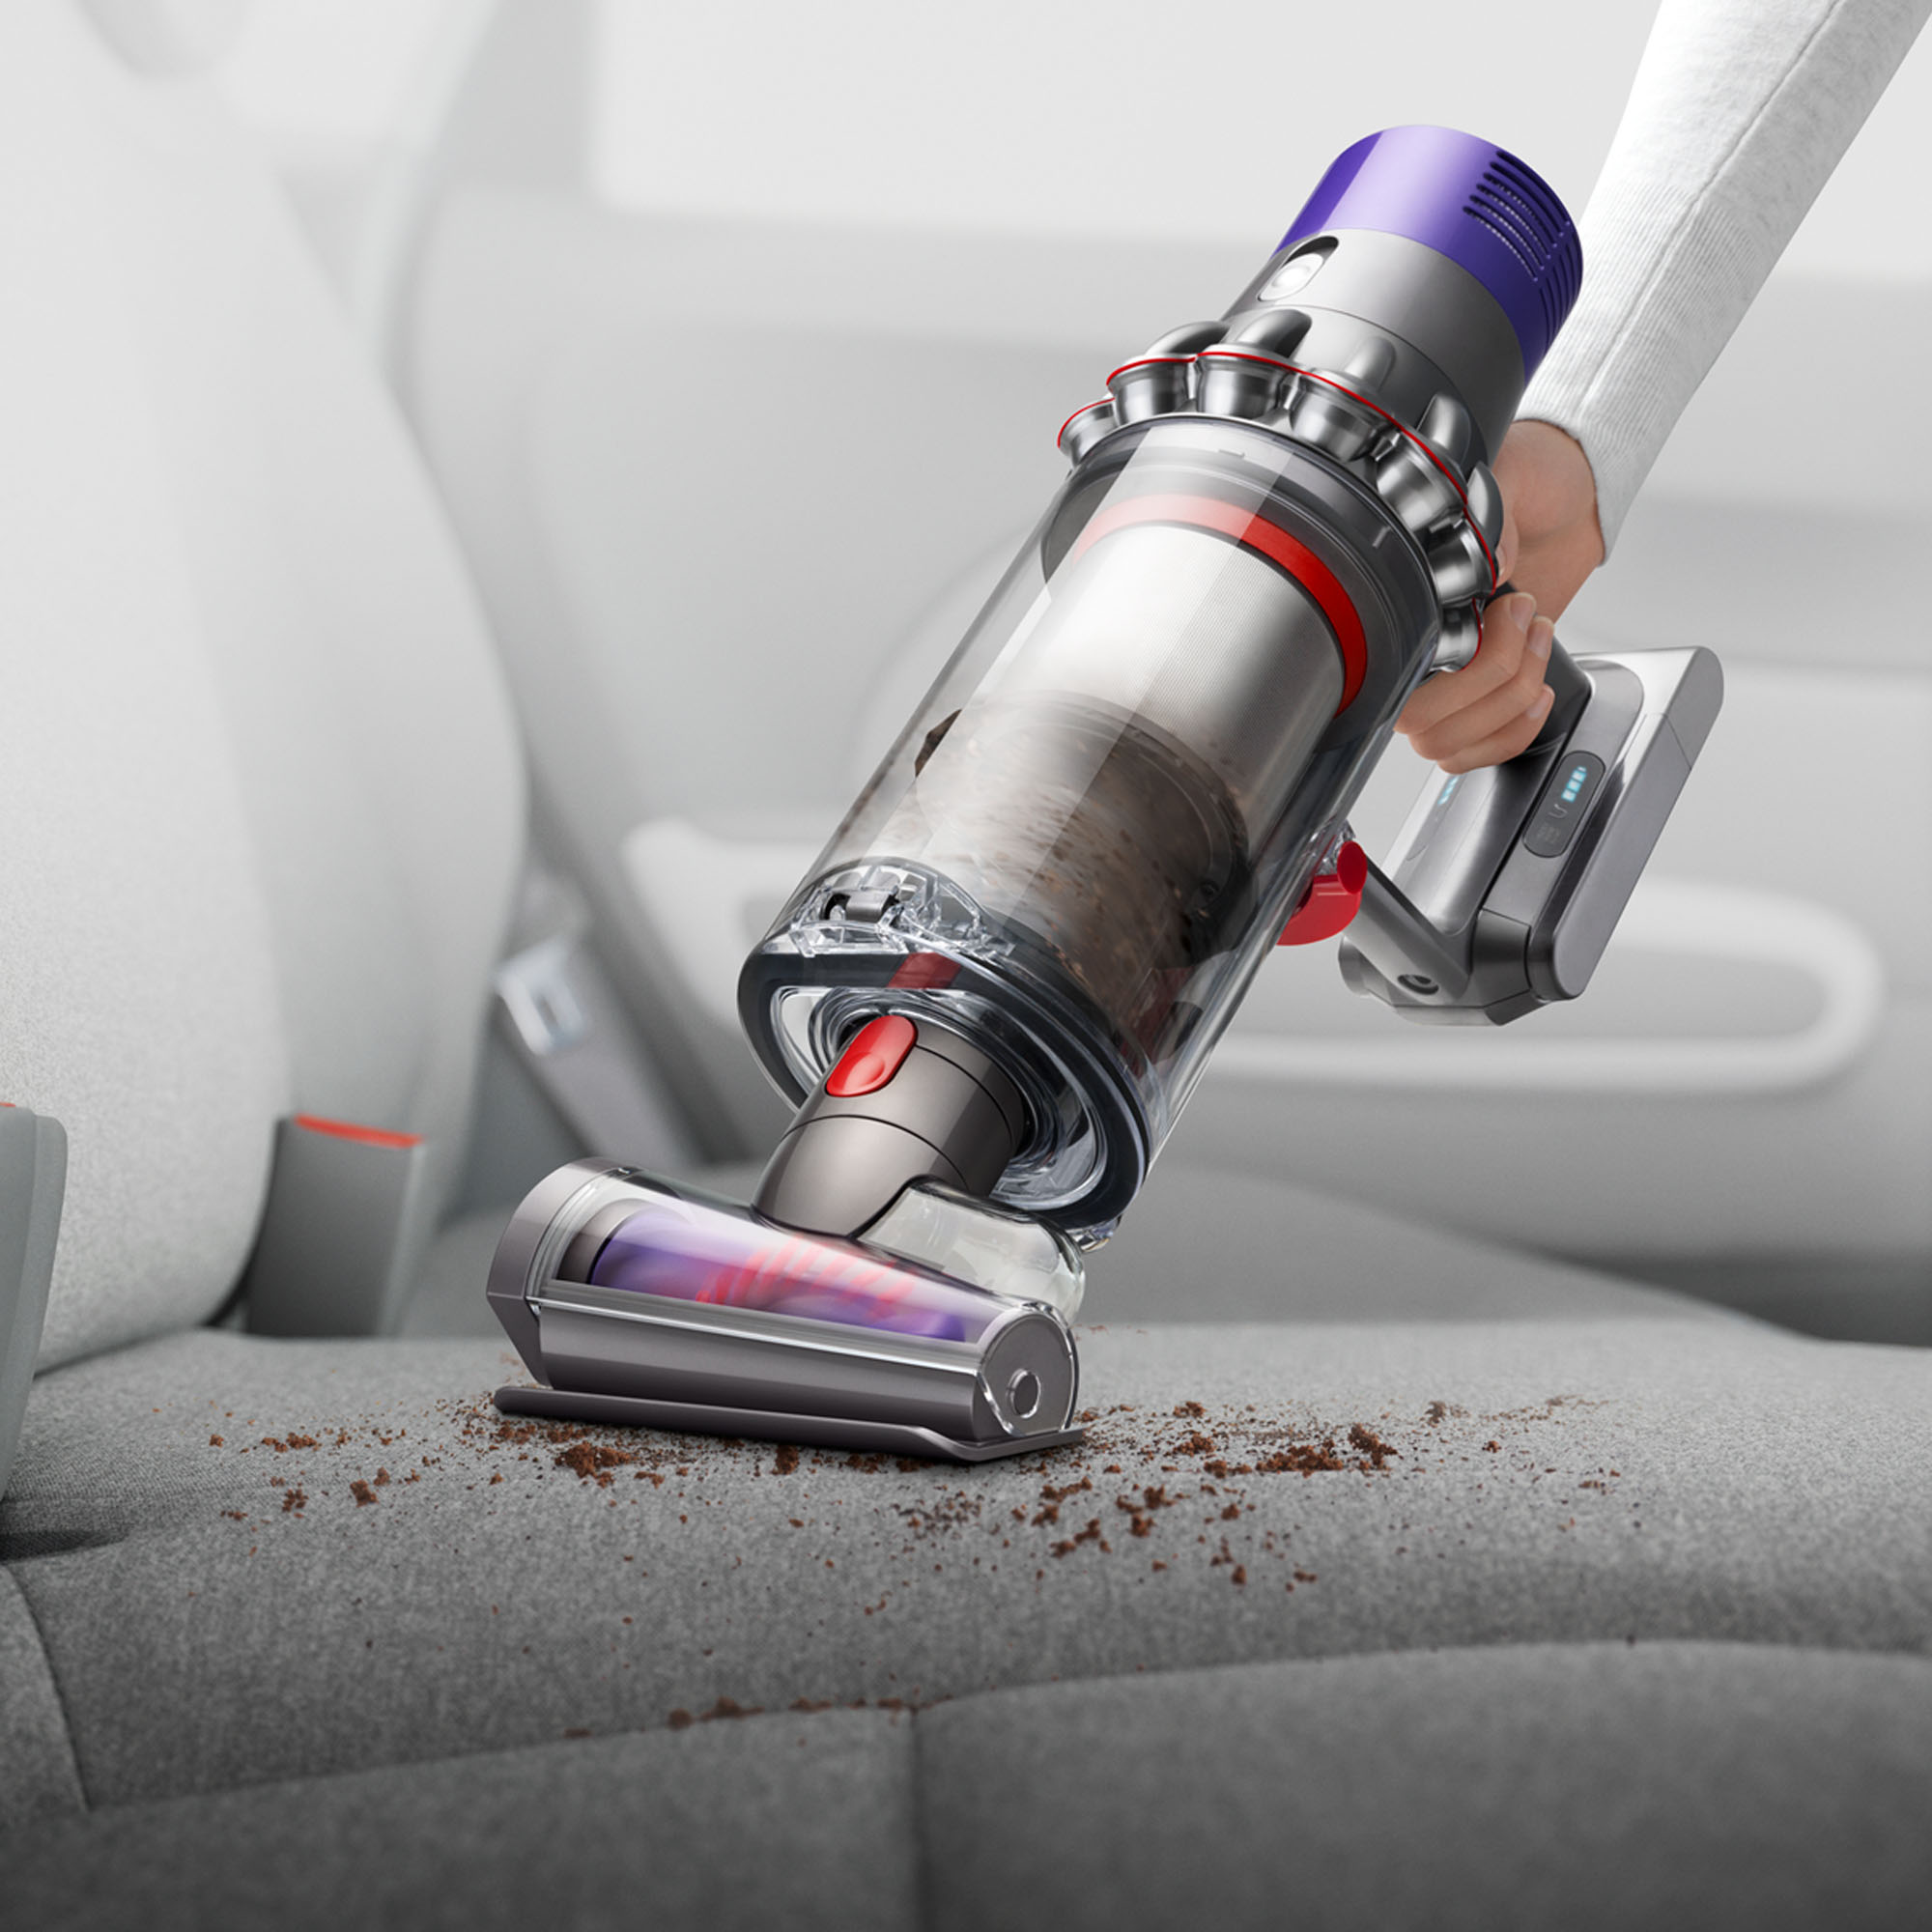 Dyson V10 Absolute Cordless Vacuum | Copper | New - image 7 of 7